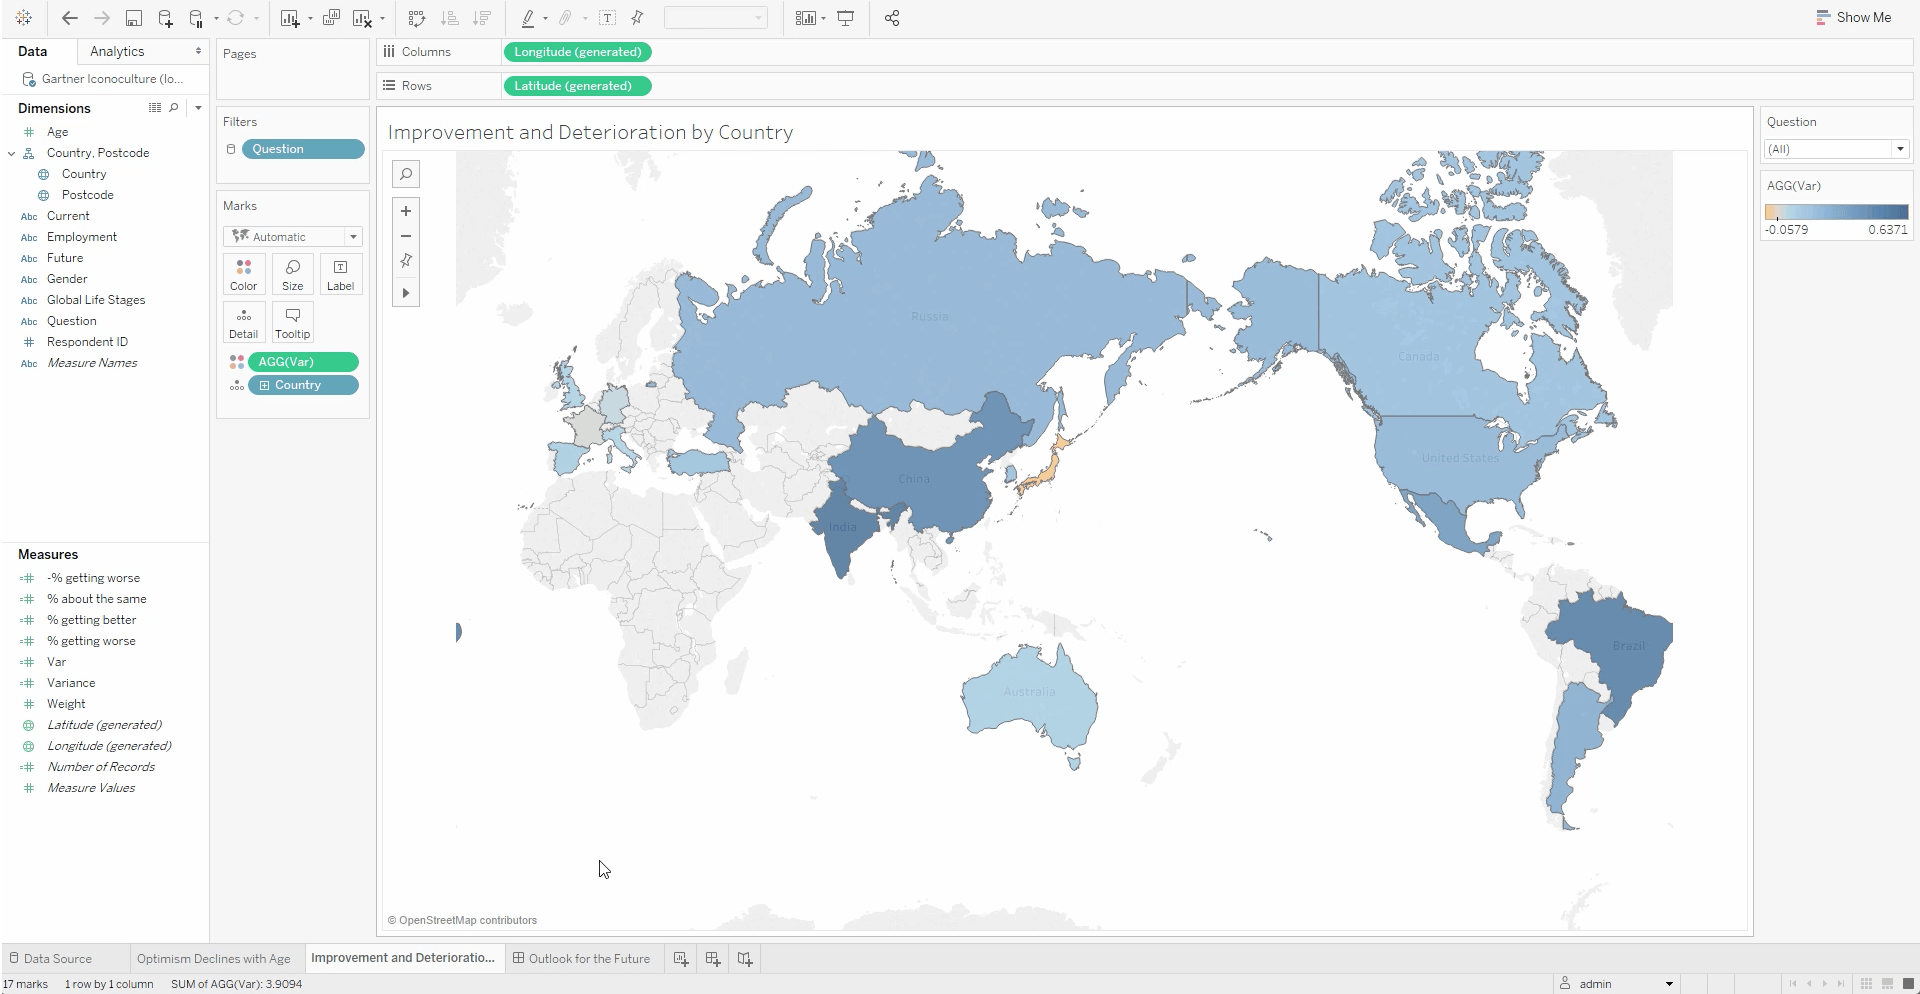 A Tableau visualization of an auto-generated map, showing that people in Japan are less optimistic about their future, based on Gartner's global survey data about loneliness